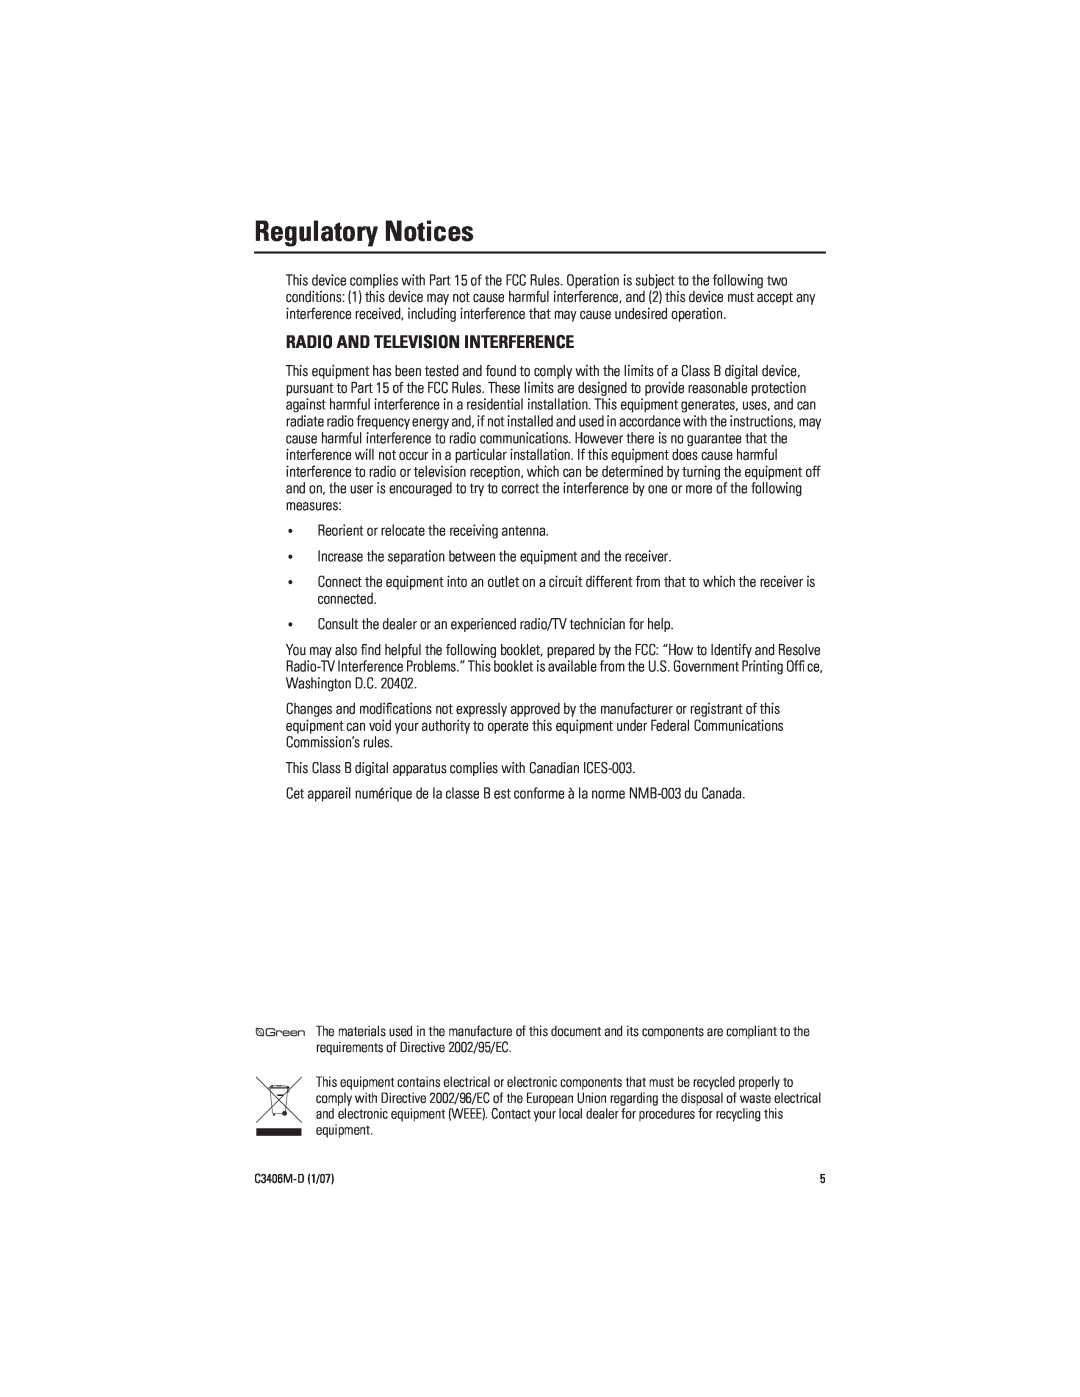 Pelco Not ICS110-CW manual Regulatory Notices, Radio And Television Interference 